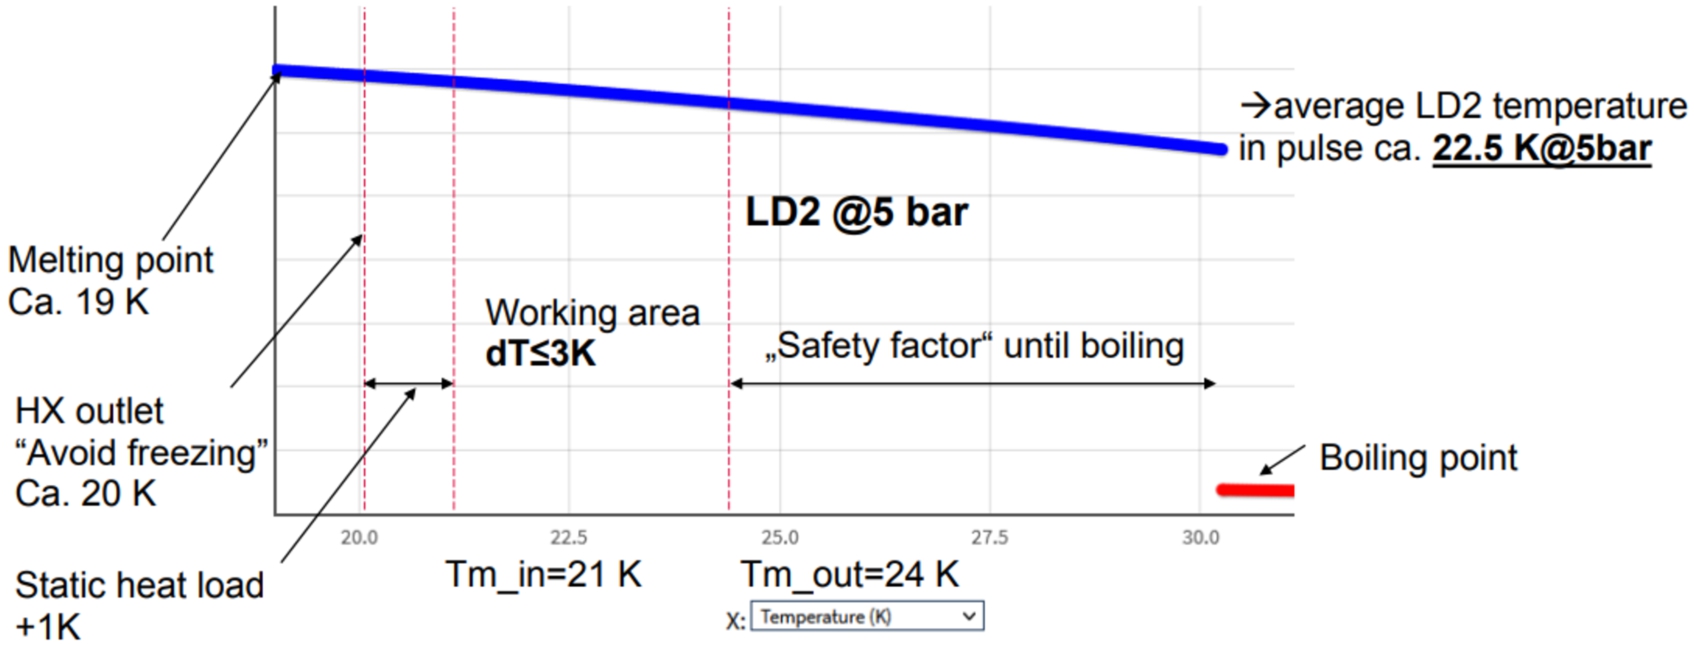 Definition of fluid parameters for the moderator LD2 volume.